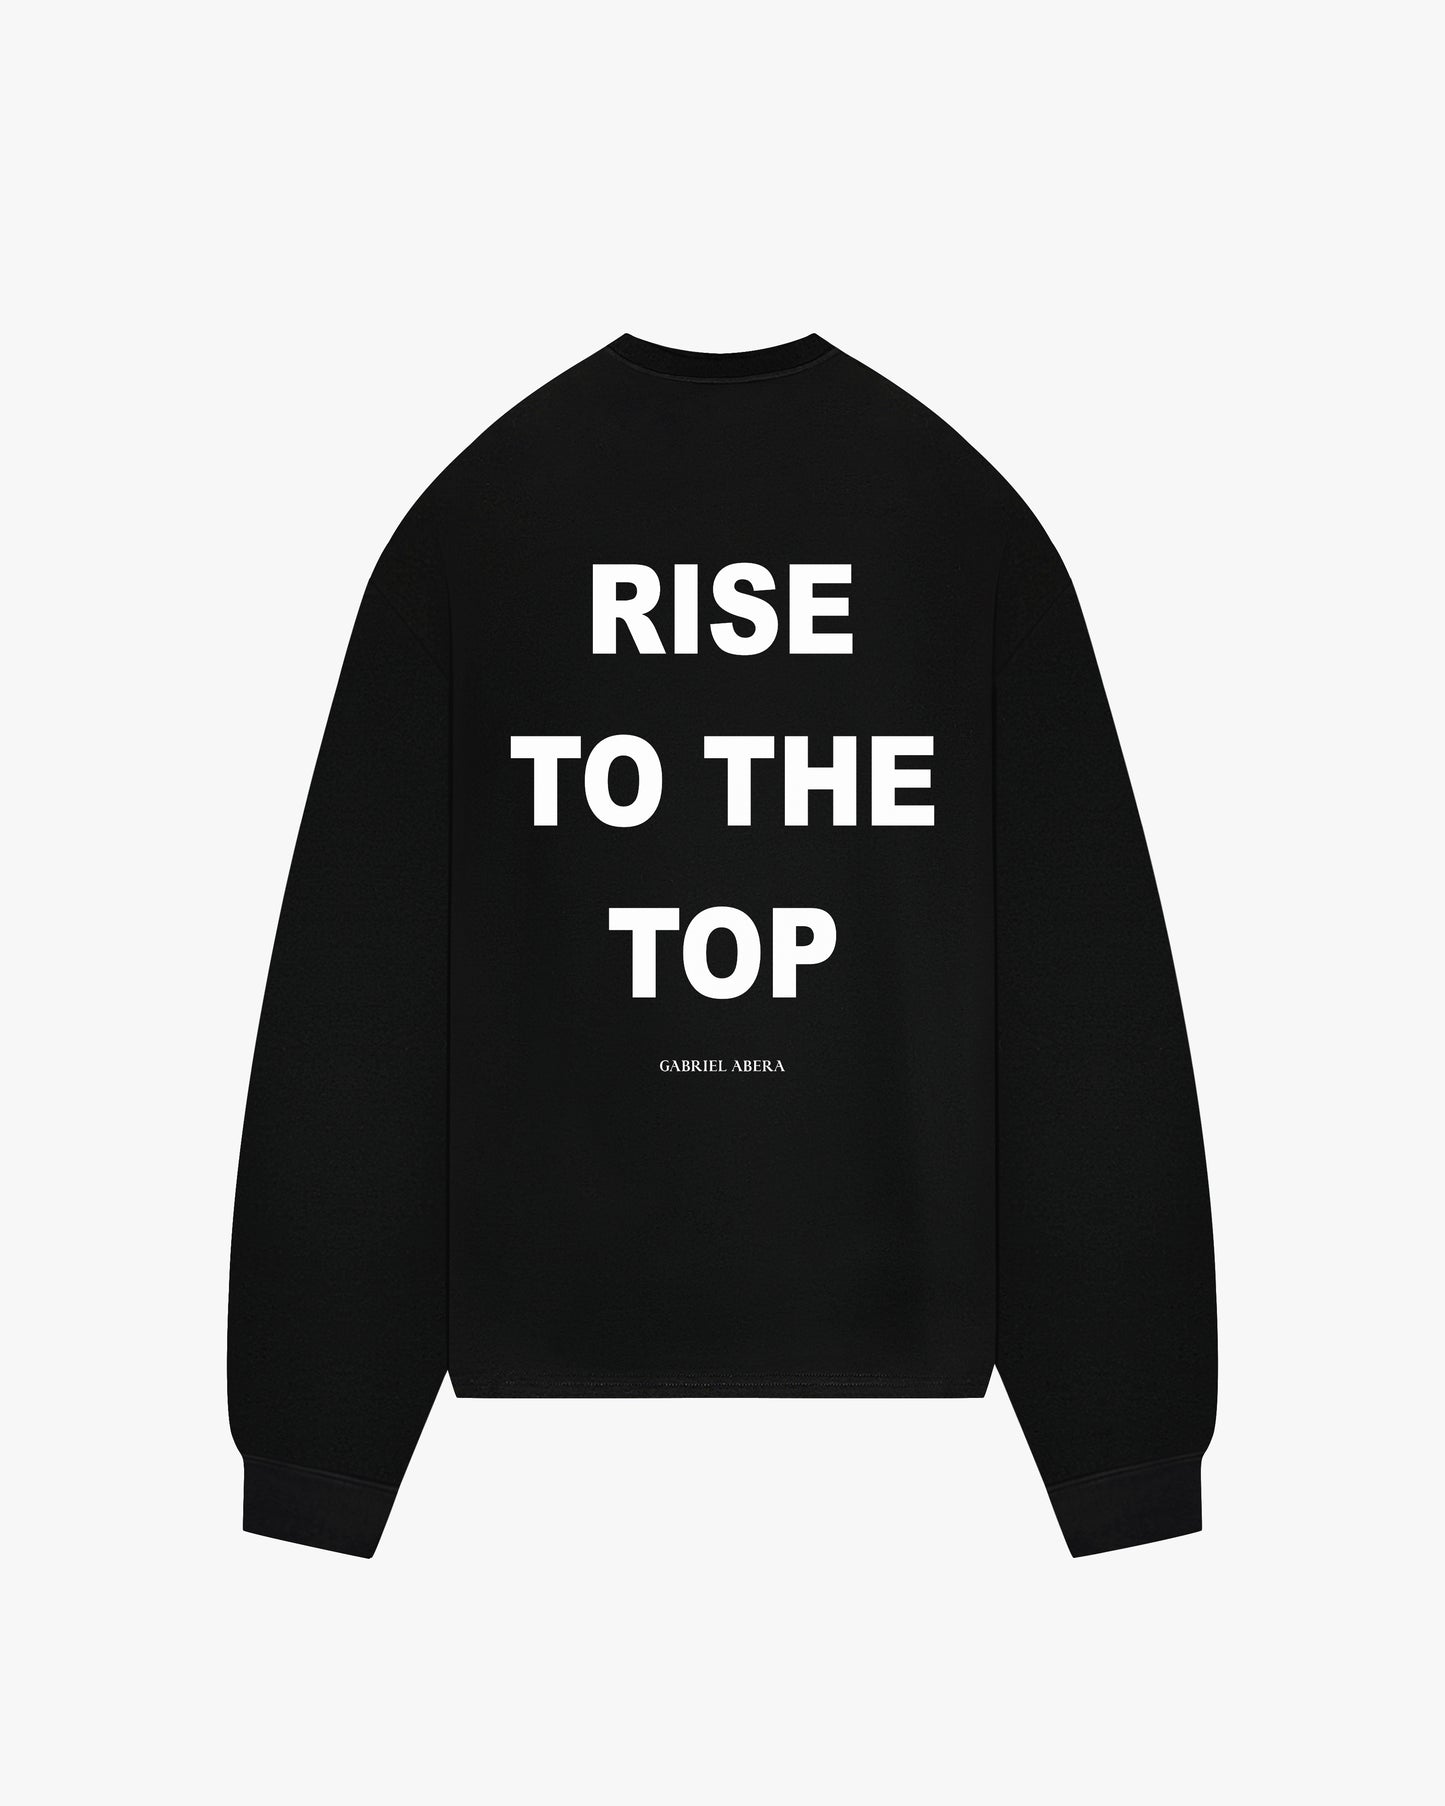 Black oversize long sleeve with white rise to the top embroidery